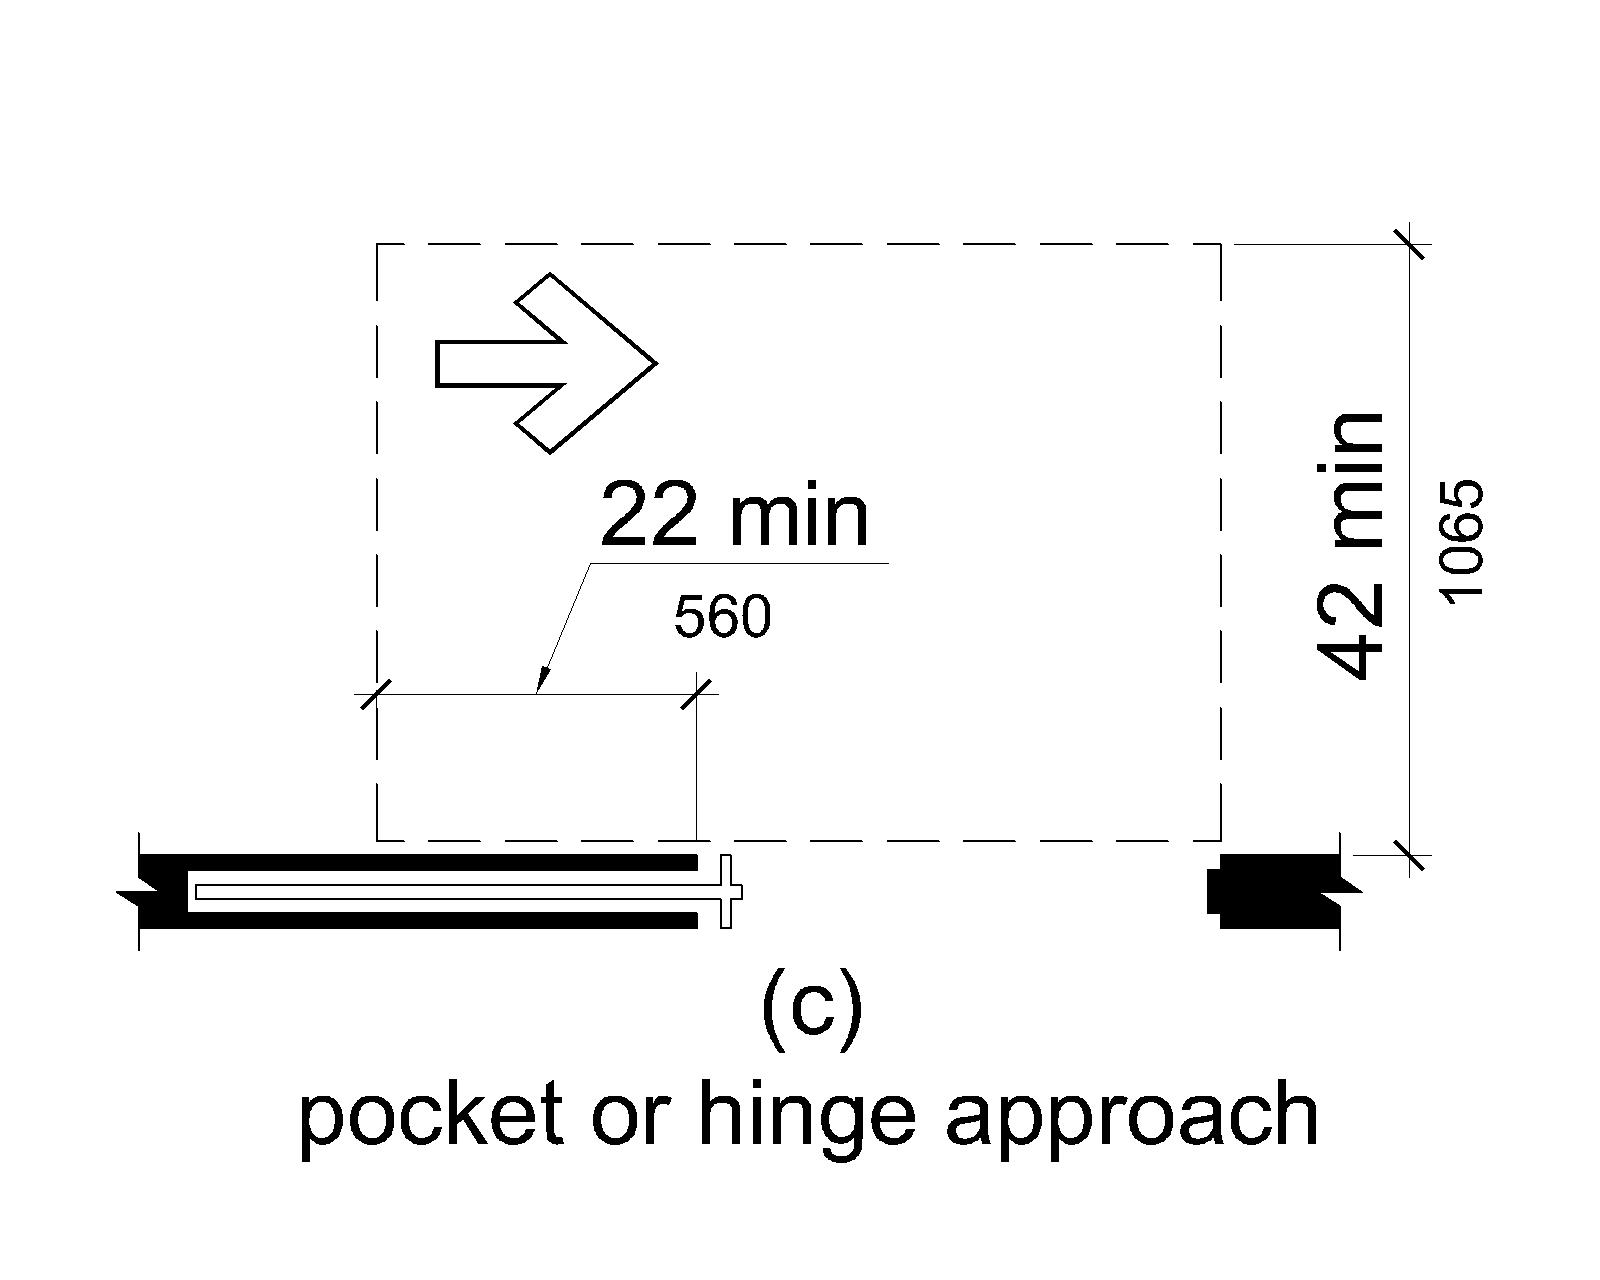 Figure (c) shows a pocket or hinge approach. Maneuvering clearance extends 22 inches (560 mm) from the pocket or hinge side and is 42 inches (1065 mm) minimum perpendicular to the doorway.